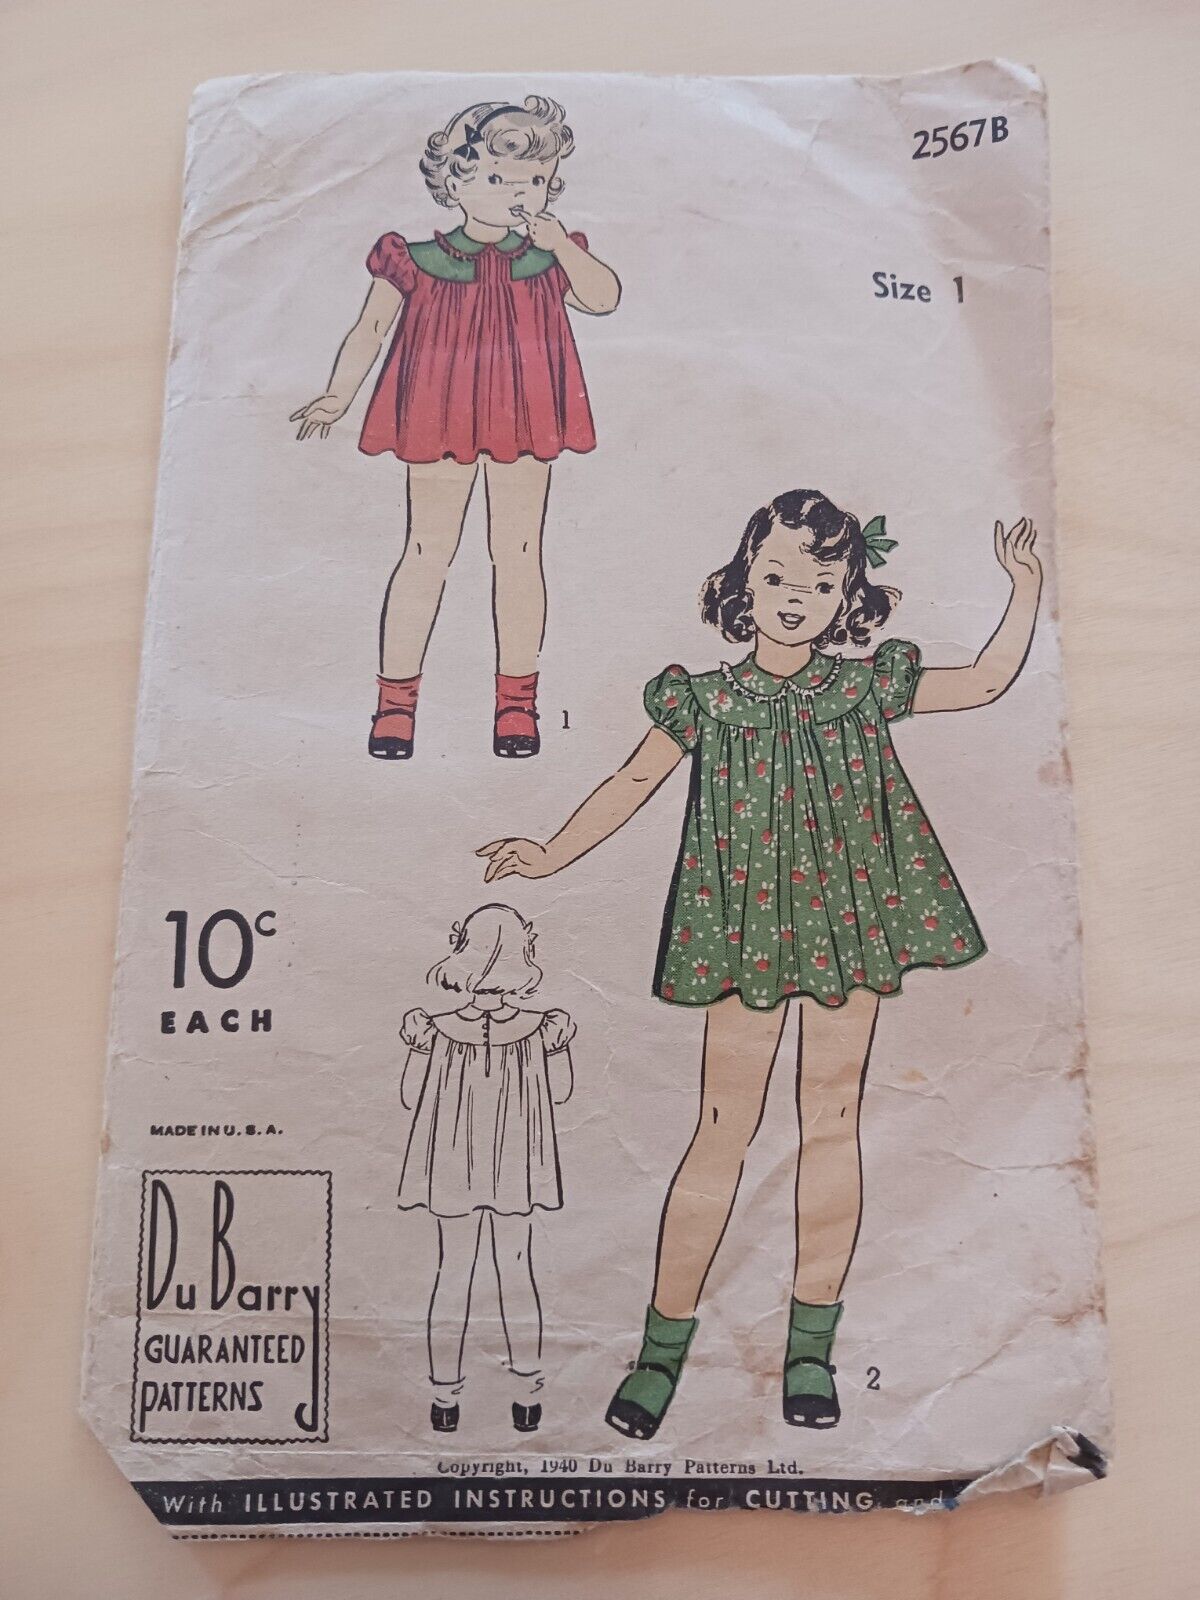 Vintage DuBerry Girls Dress Sewing Pattern 2567b From 1940 Shirley Temple Size 1